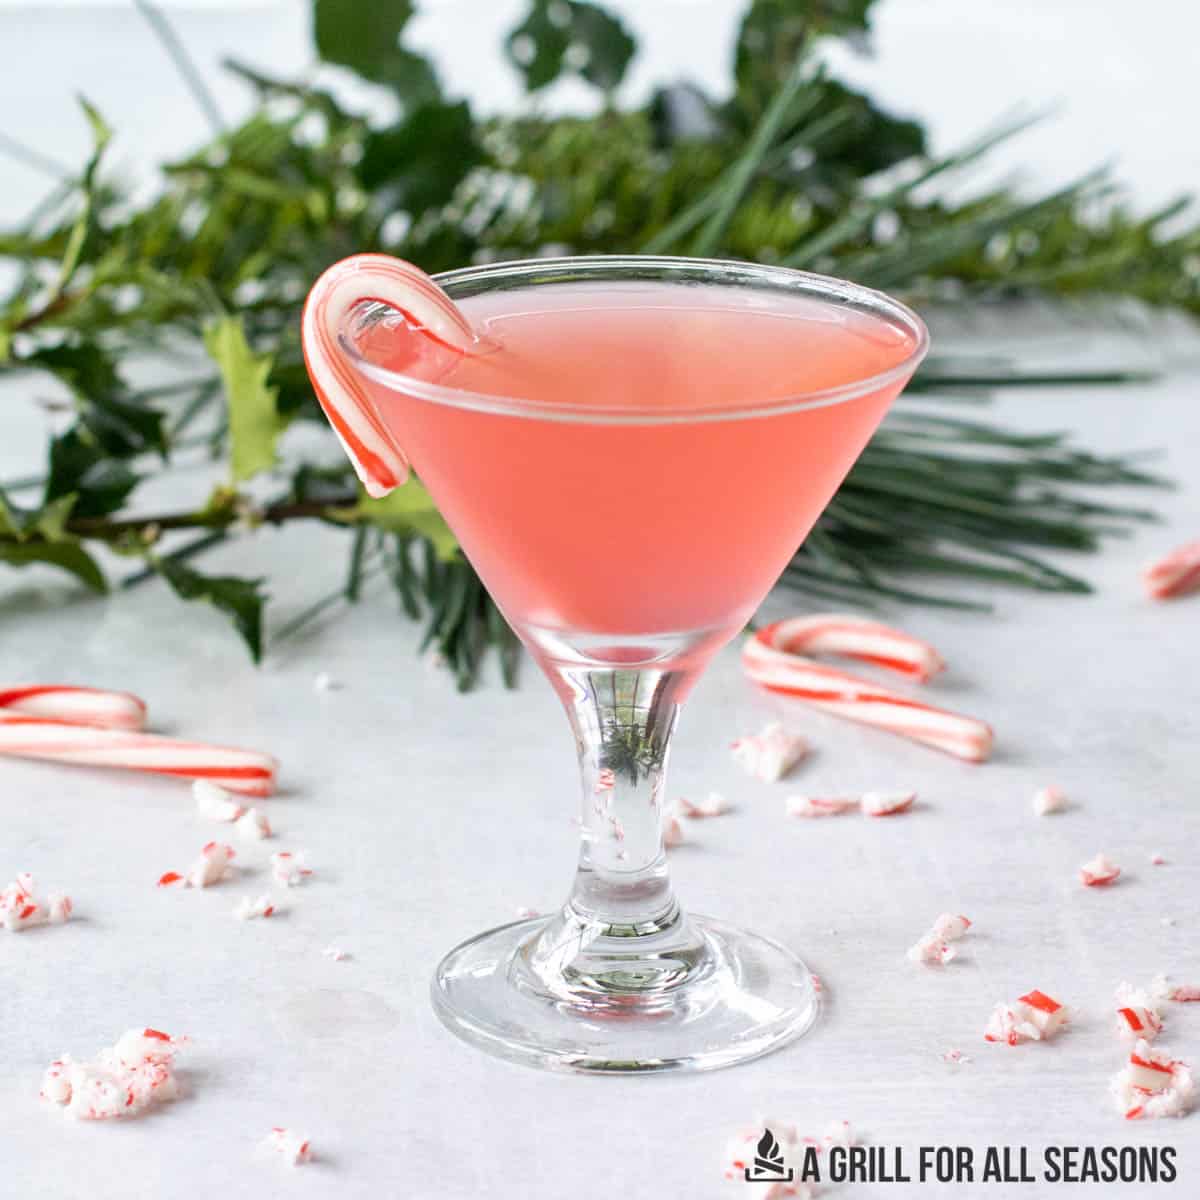 candy cane martini in front of greenery